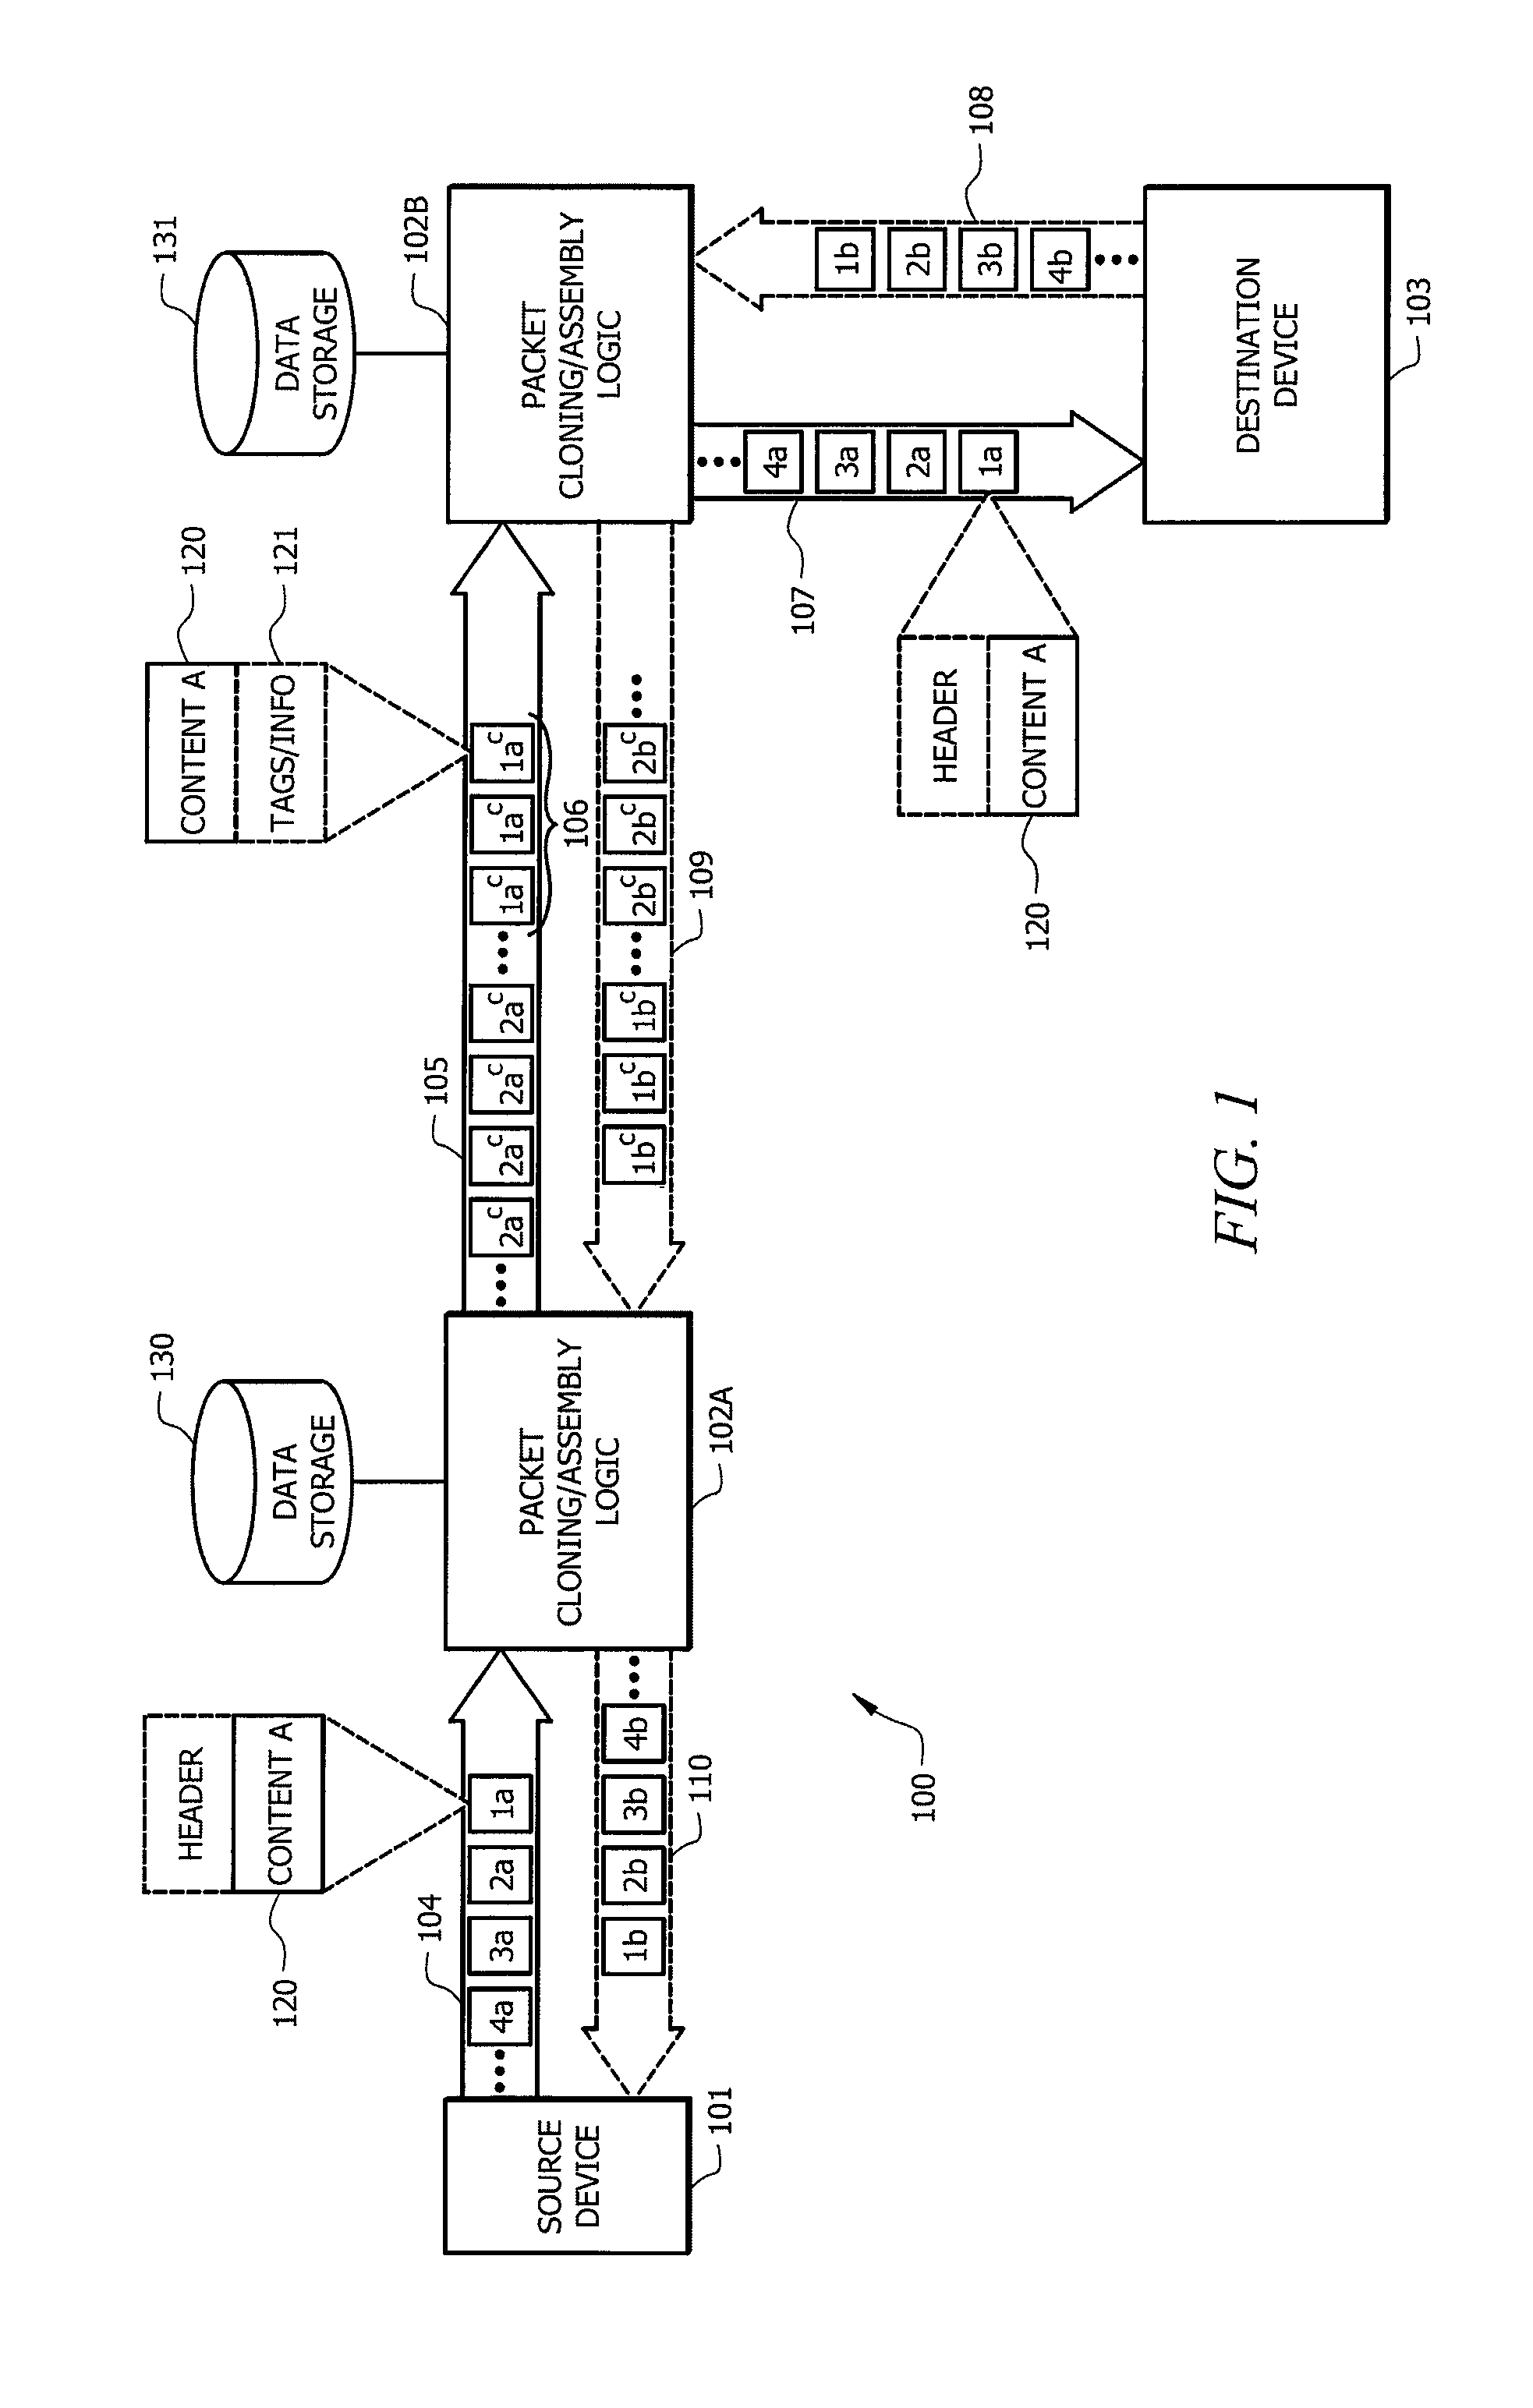 Packet cloning for enhanced delivery of communication from a source device to one or more destination devices